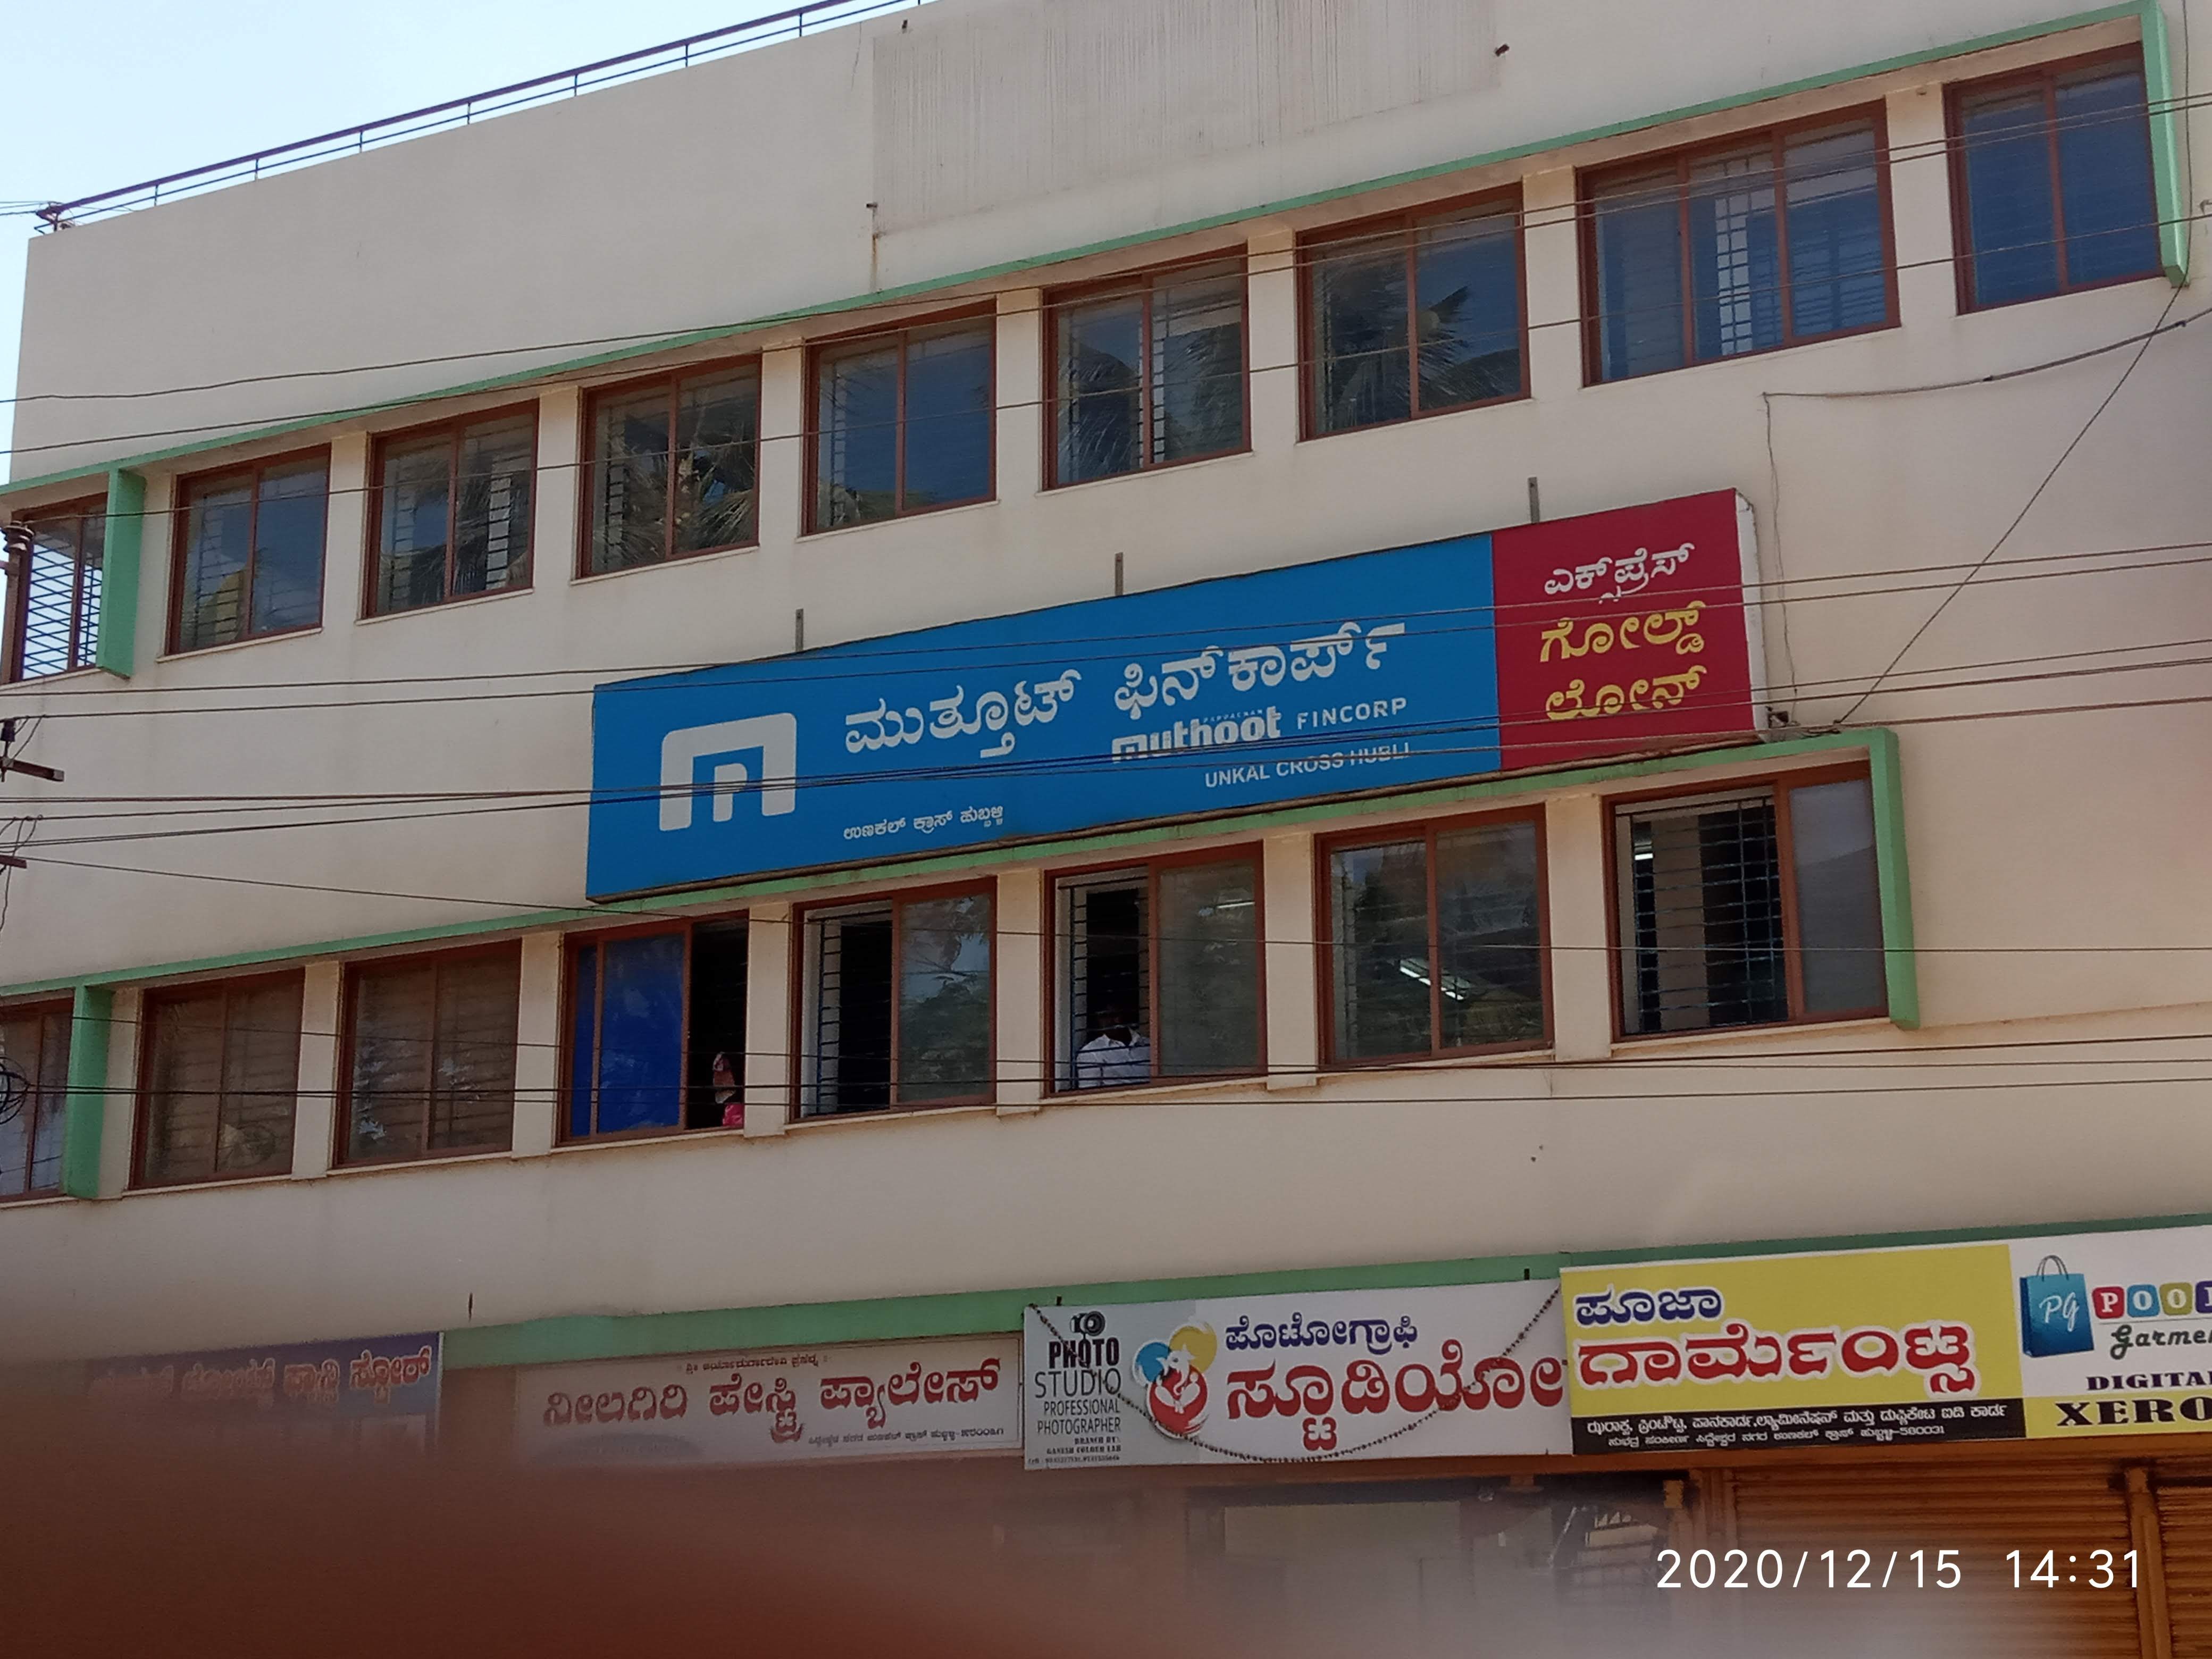 Photos and Videos of Muthoot Fincorp Gold Loan in Near Laxmi Temple, Hubli